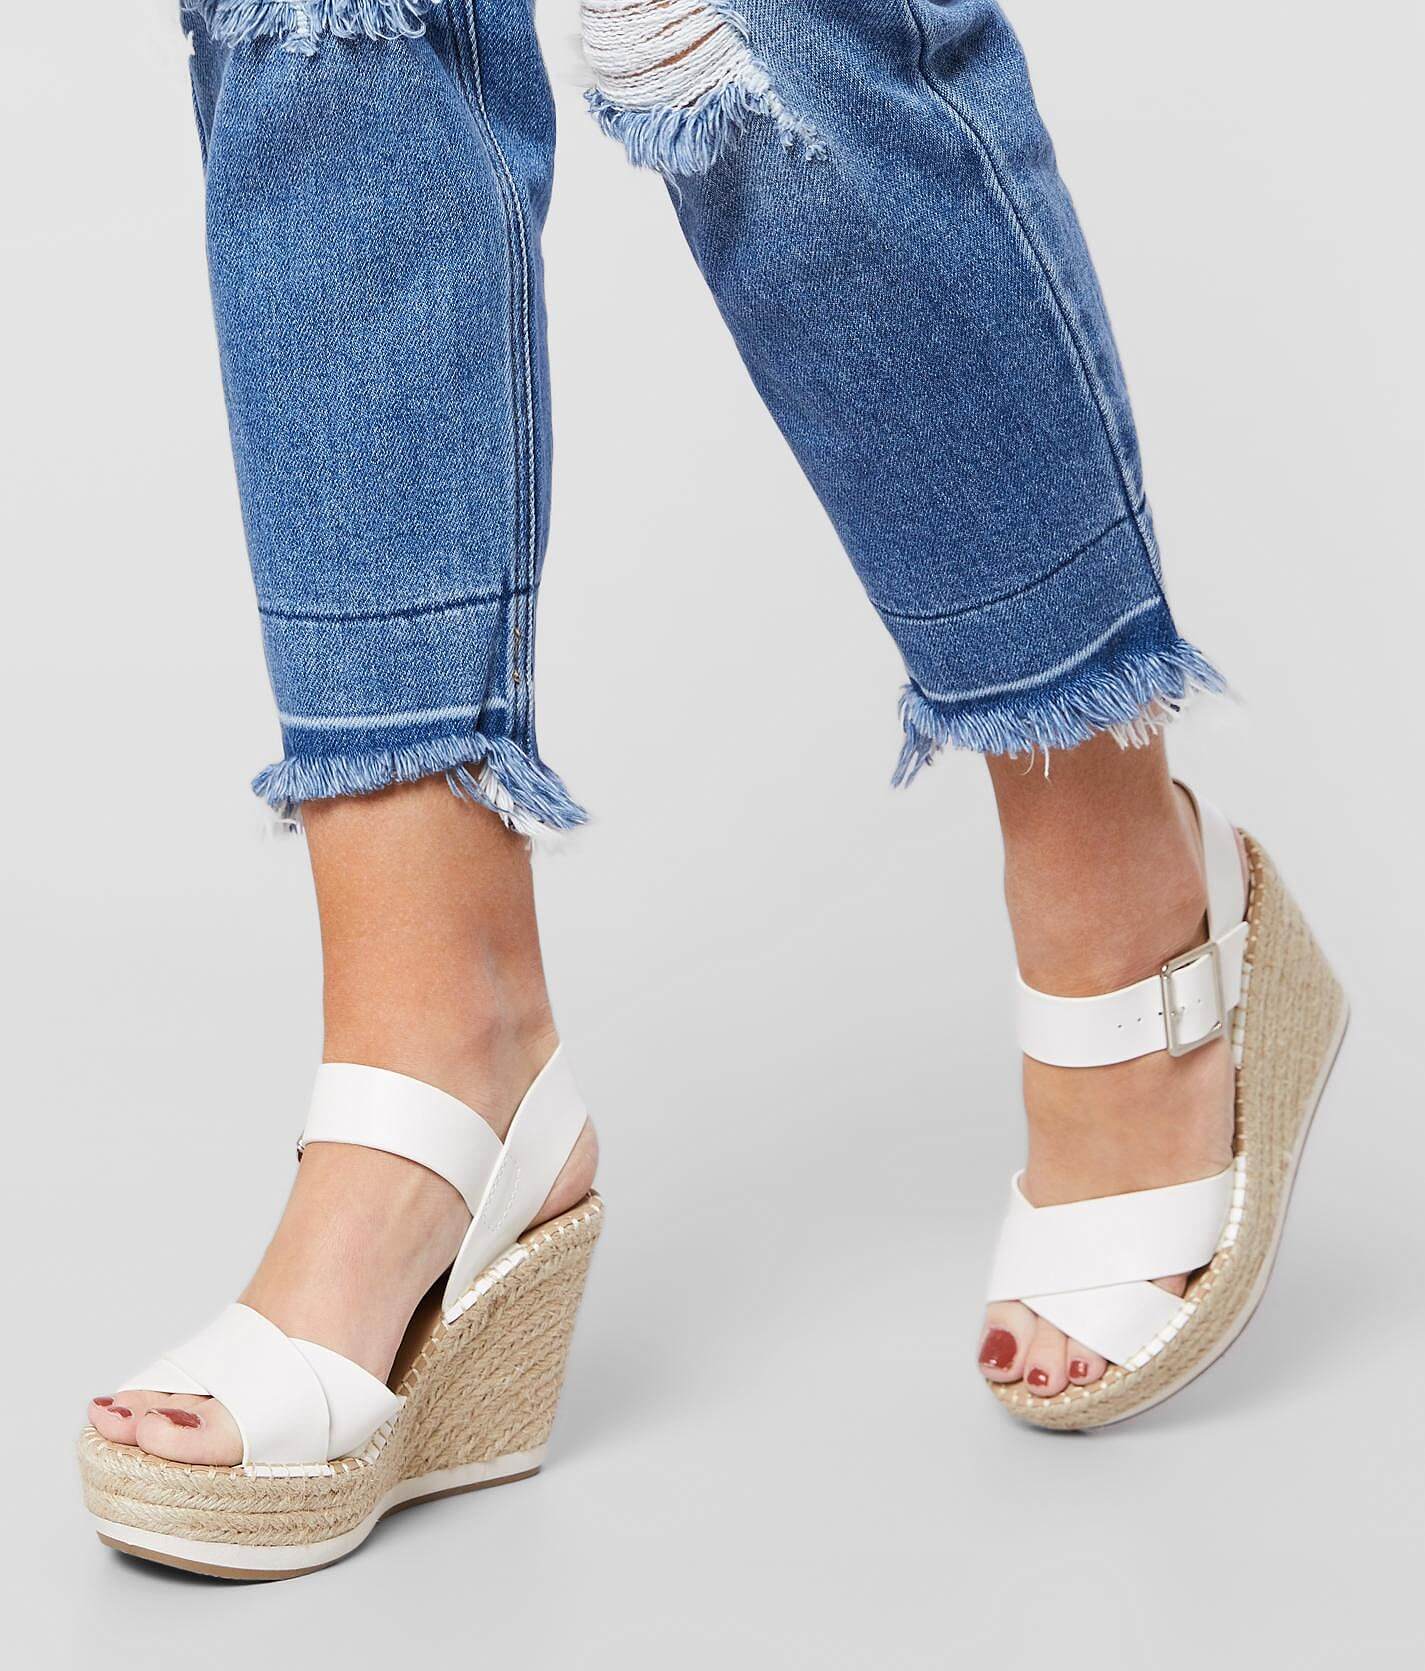 soda shoes wedges